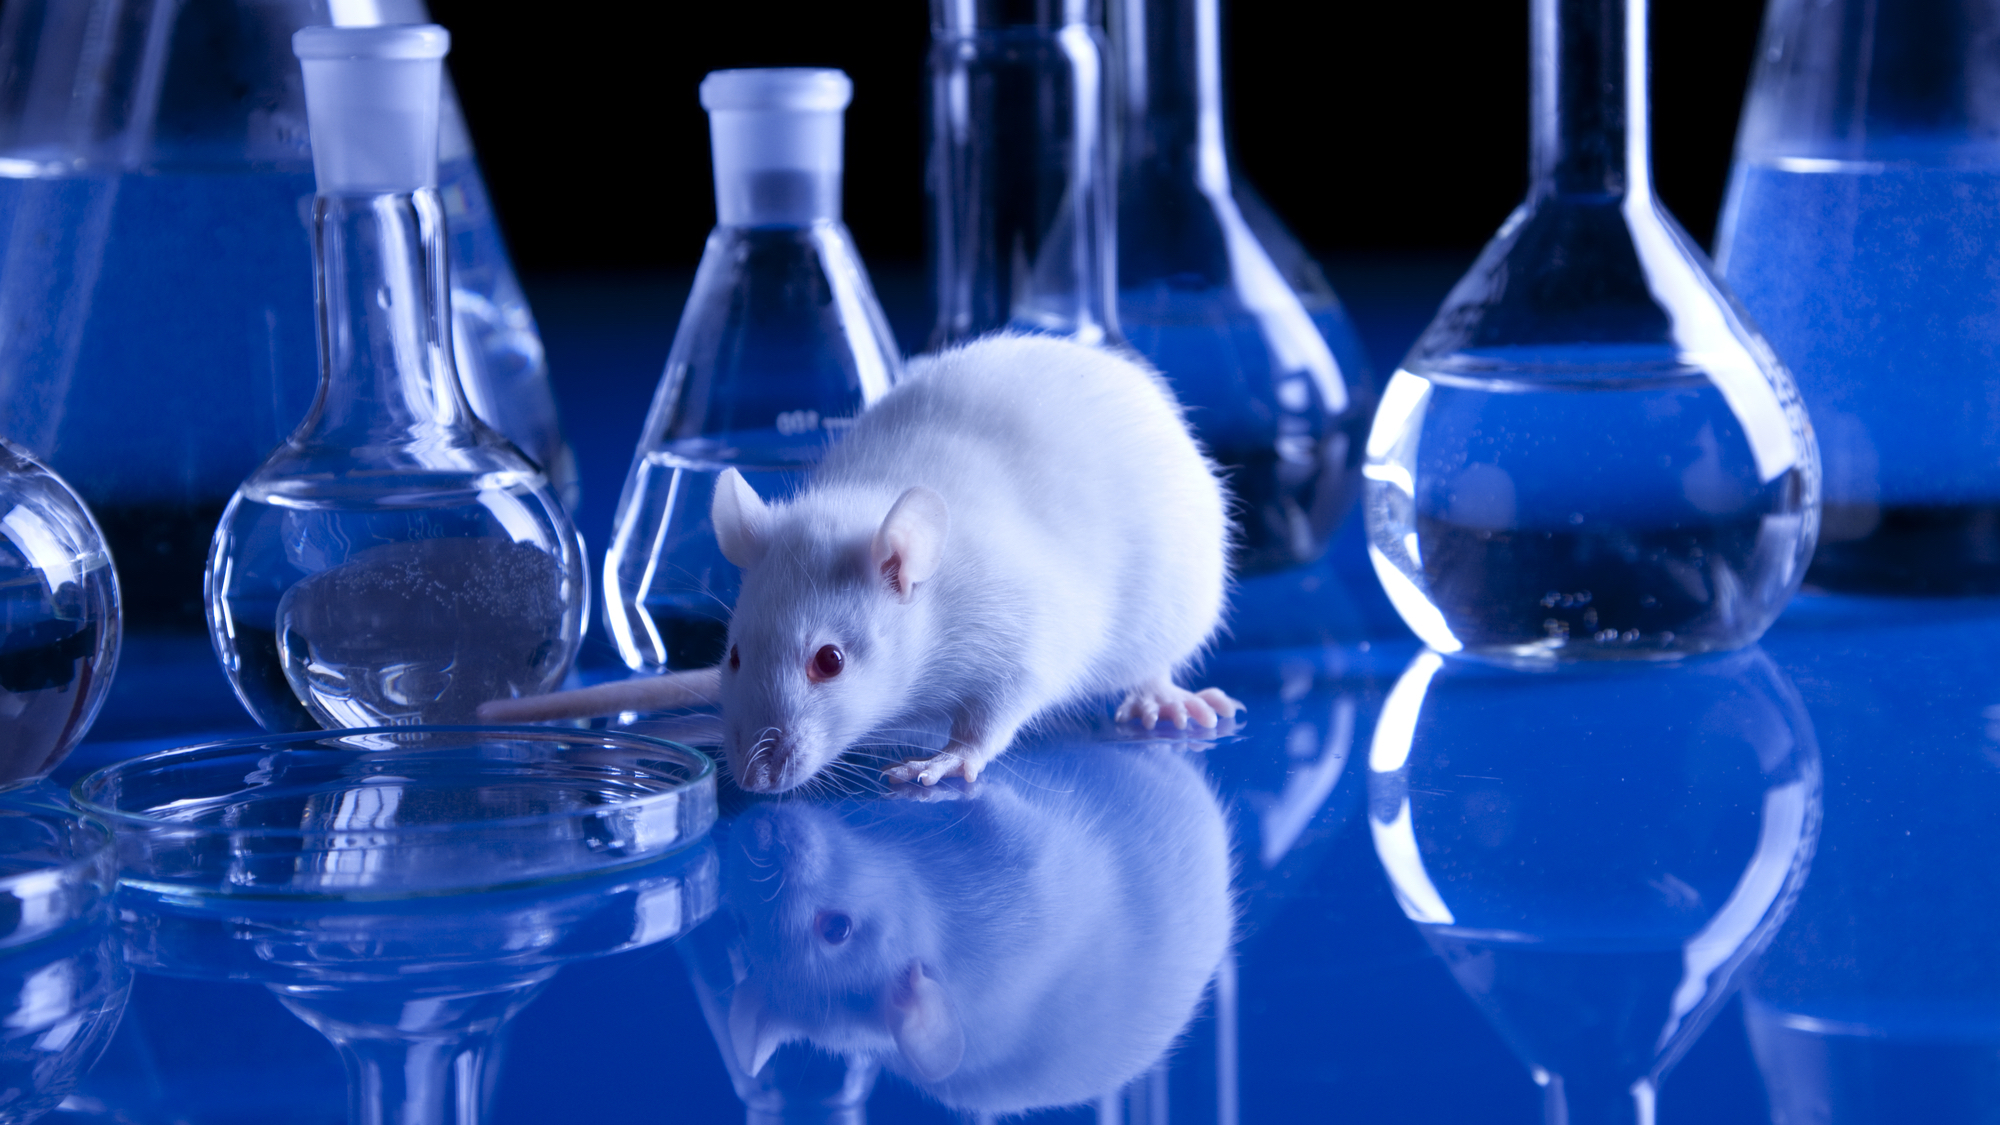 Lab mouse on table in front of lab flasks and beakers in blue lighting